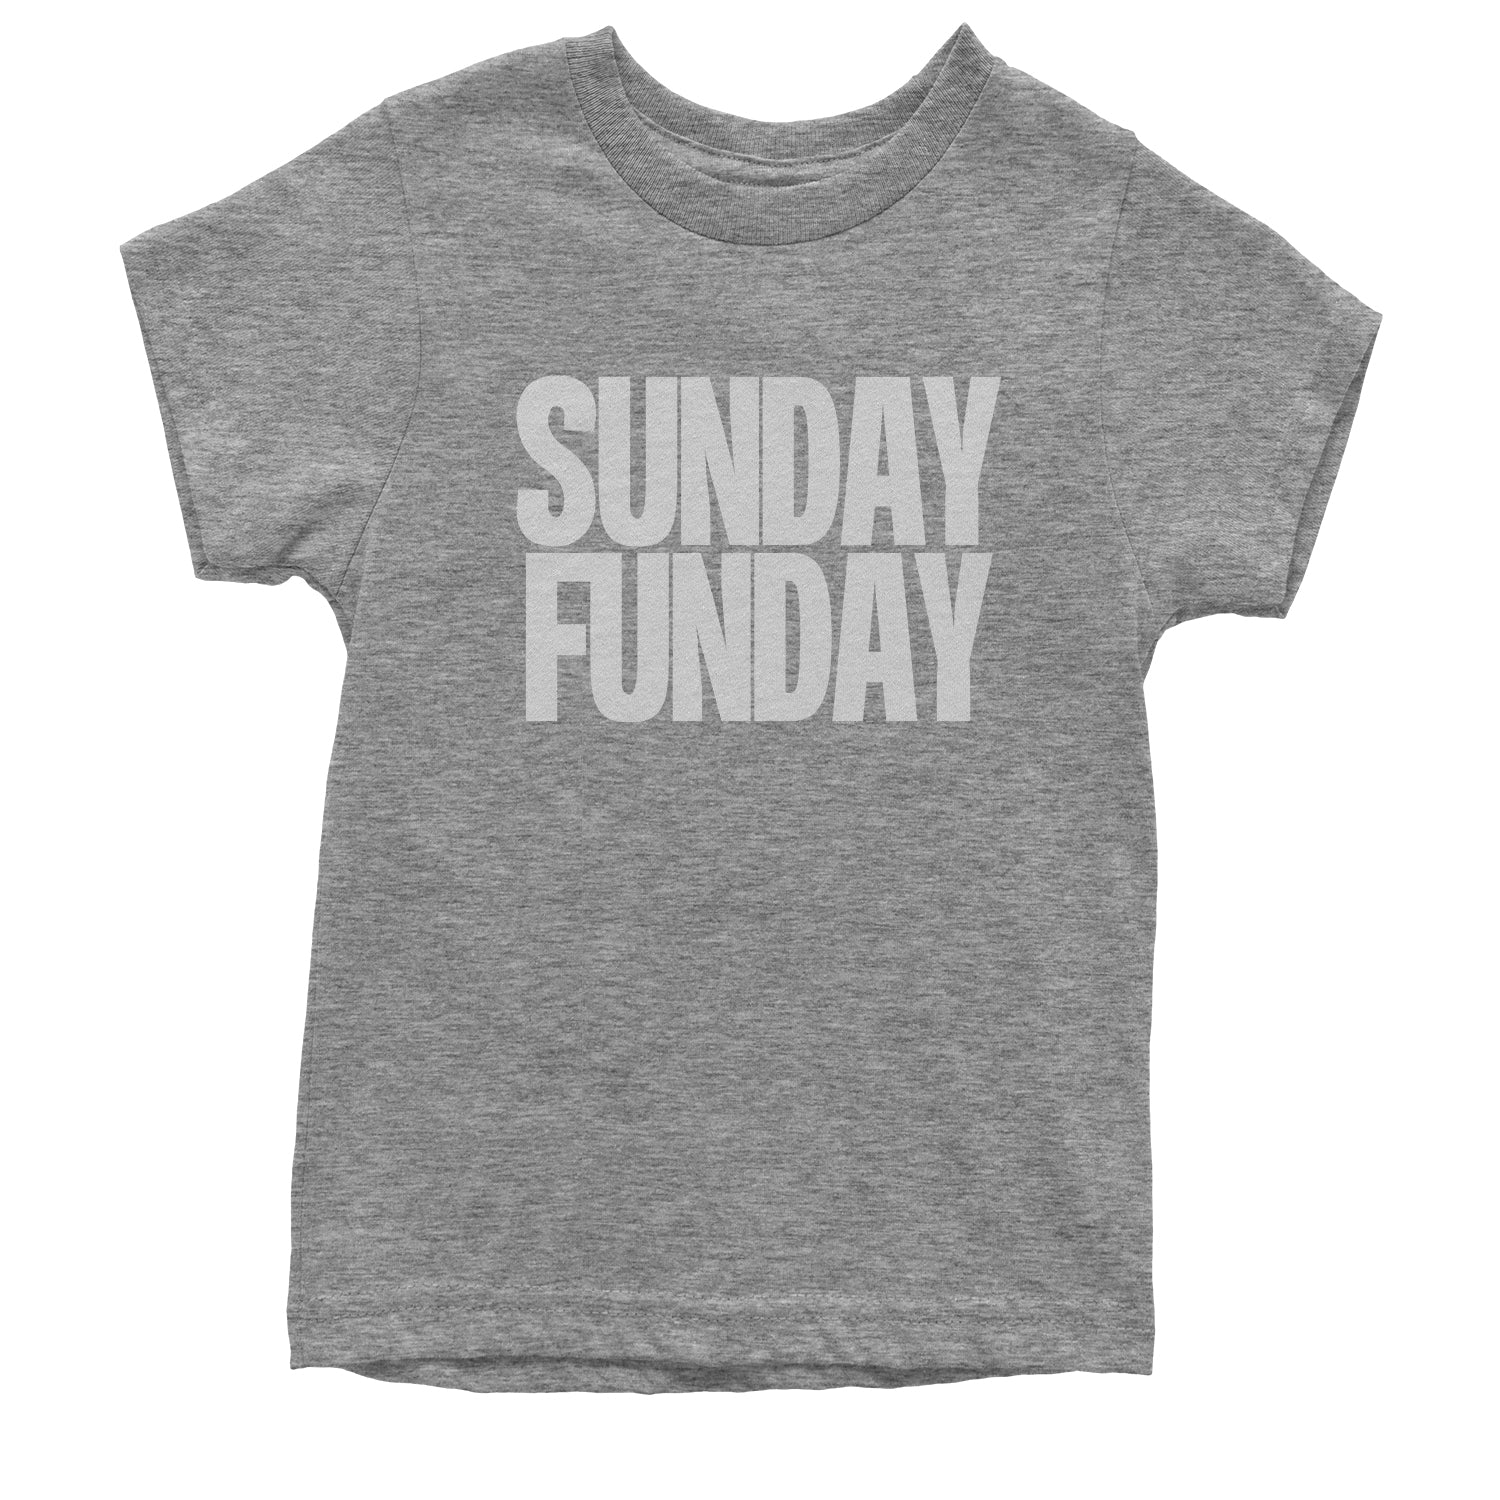 Sunday Funday Youth T-shirt day, drinking, fun, funday, partying, sun, Sunday by Expression Tees